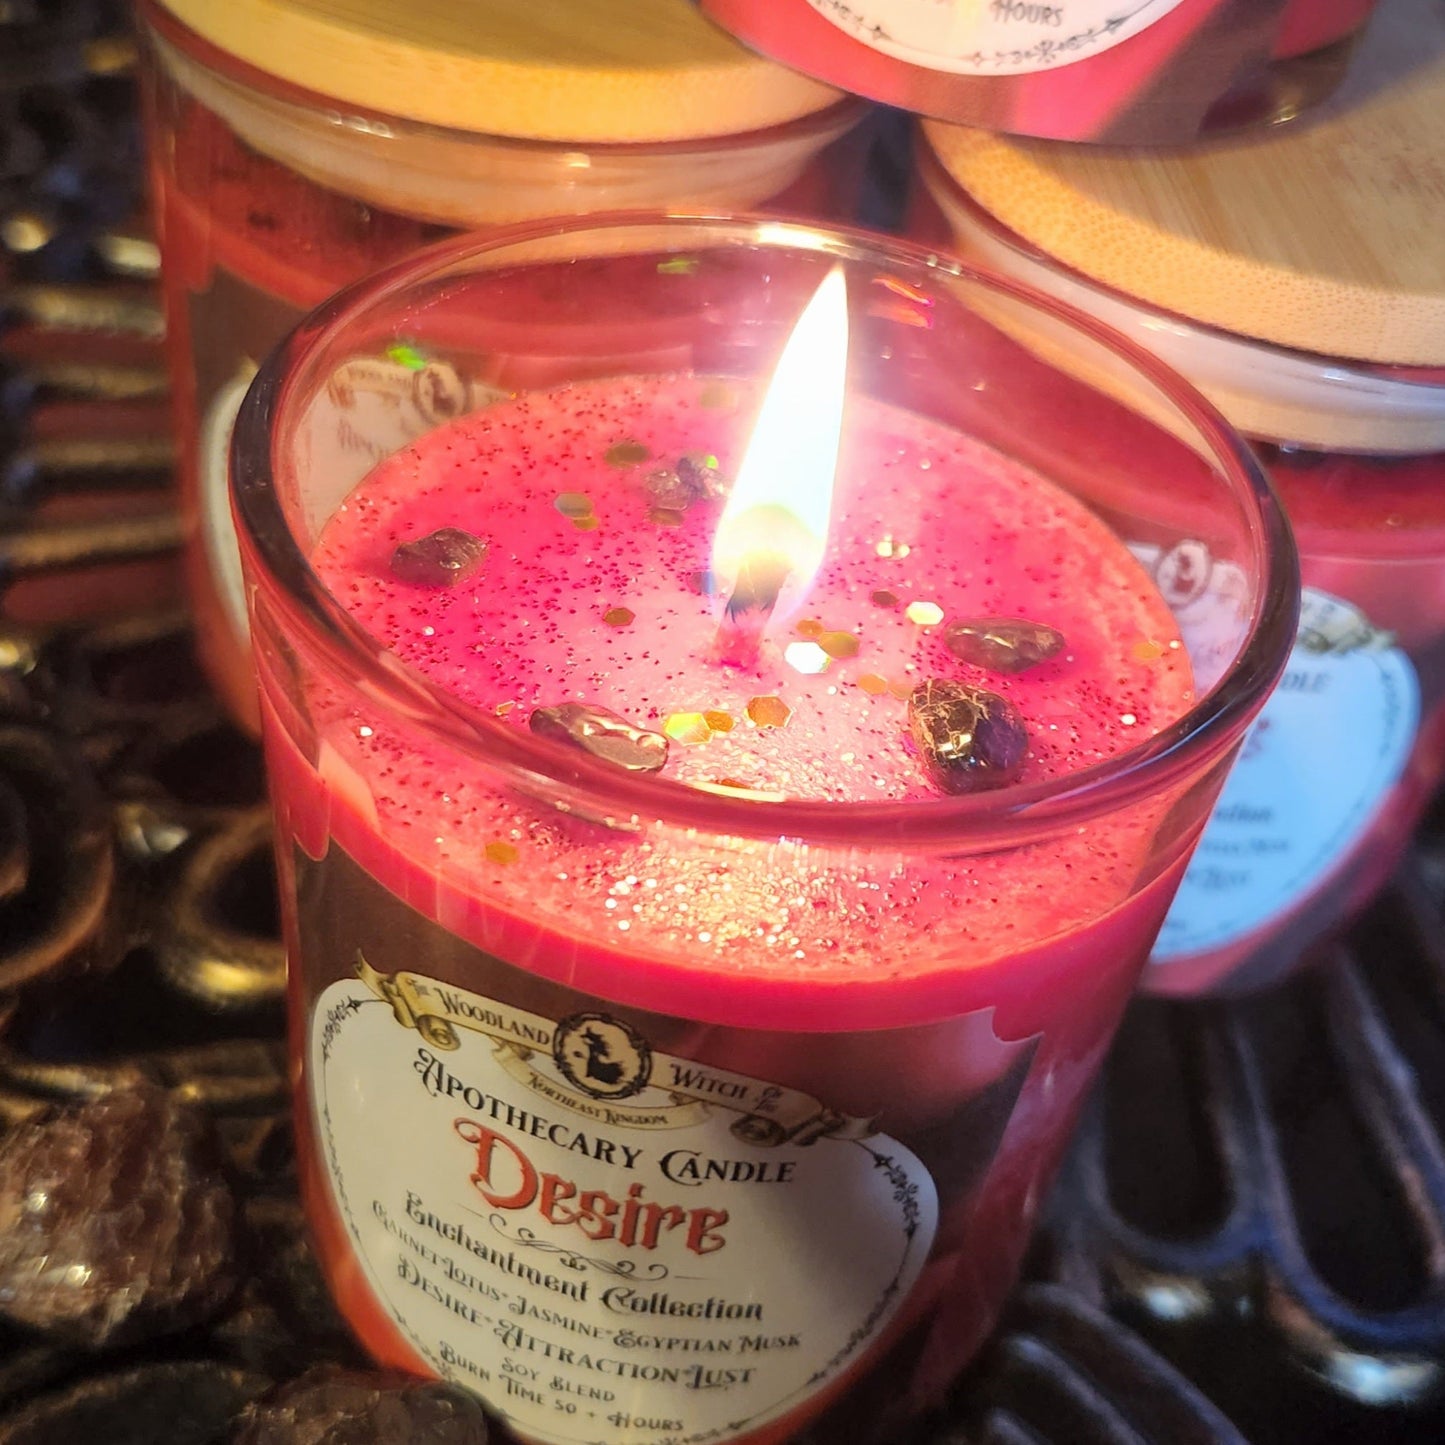 DESIRE APOTHECARY CANDLE Woodland Witchcraft